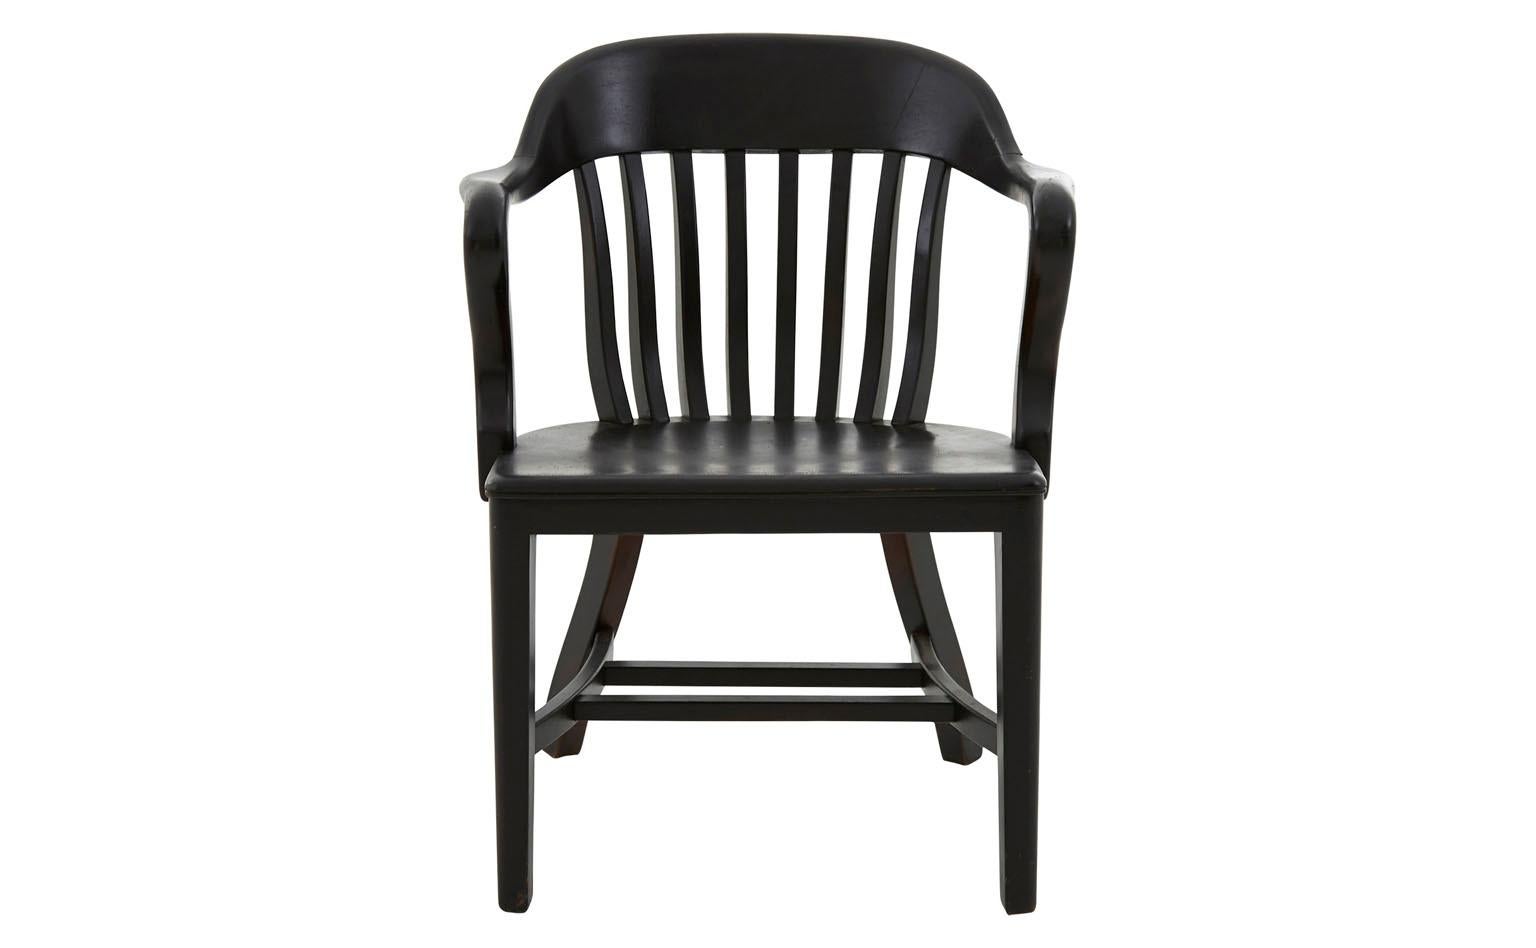 • Painted black finish as found
• 20th century
• American.

Dimensions:
• 24